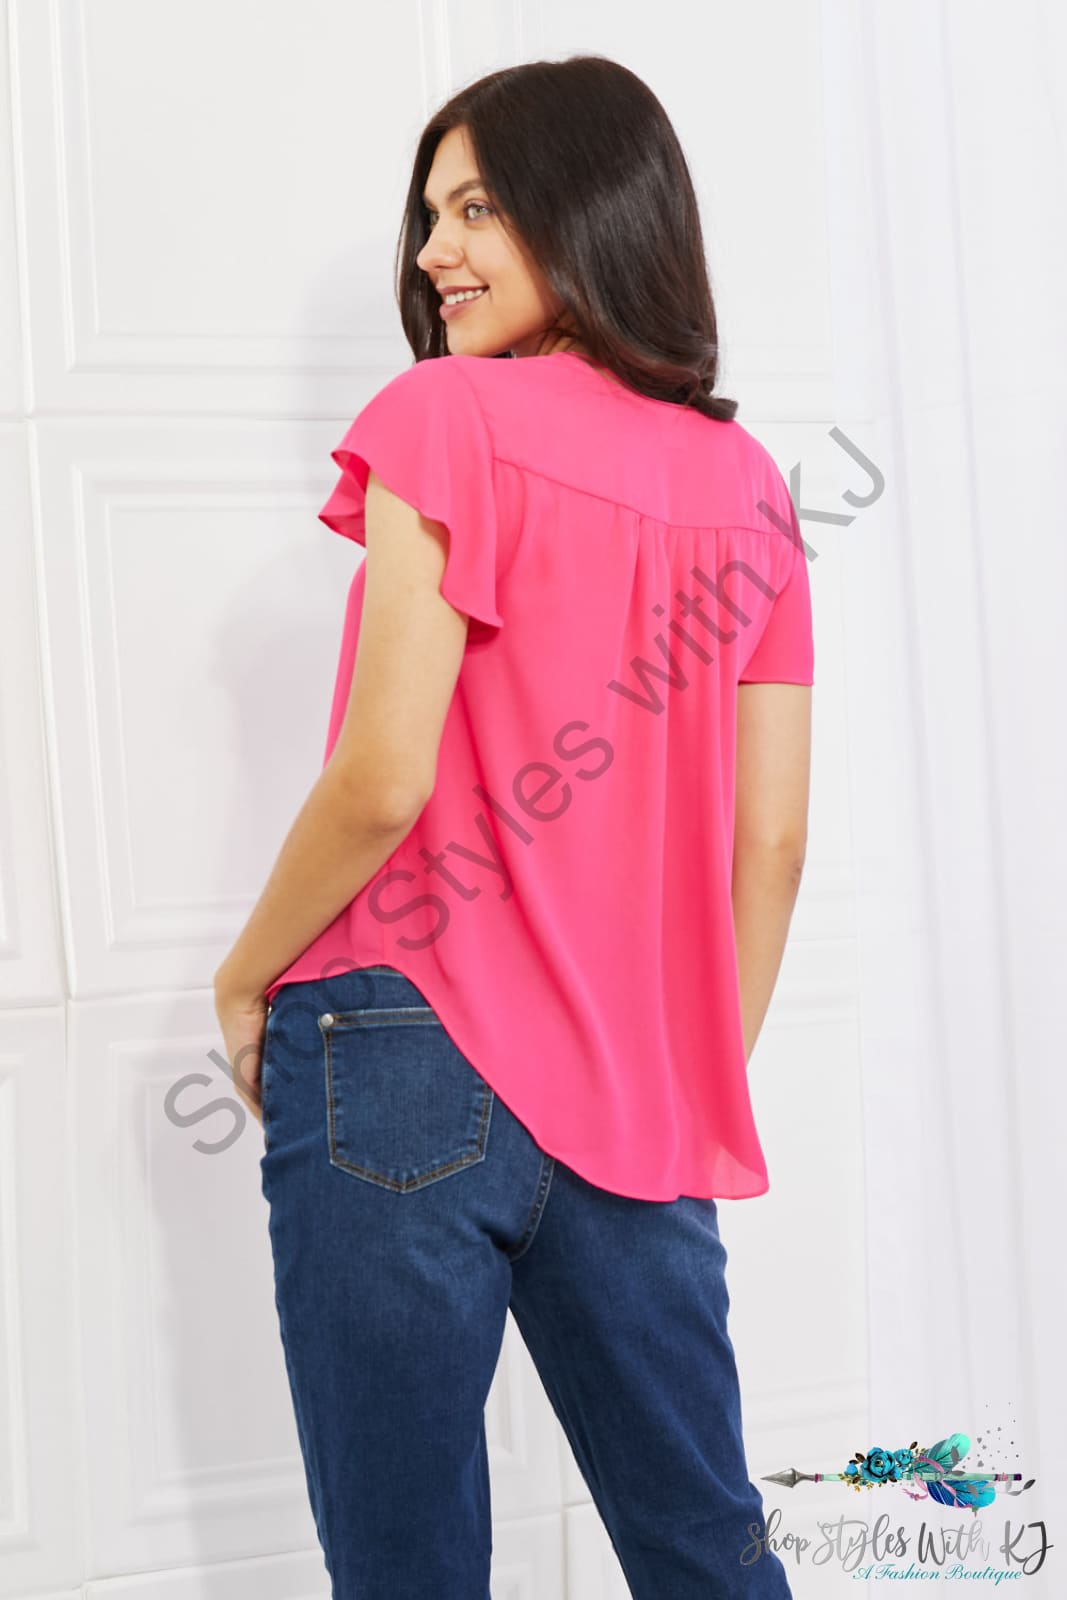 Sew In Love Just For You Full Size Short Ruffled Sleeve Length Top In Hot Pink Shirts & Tops